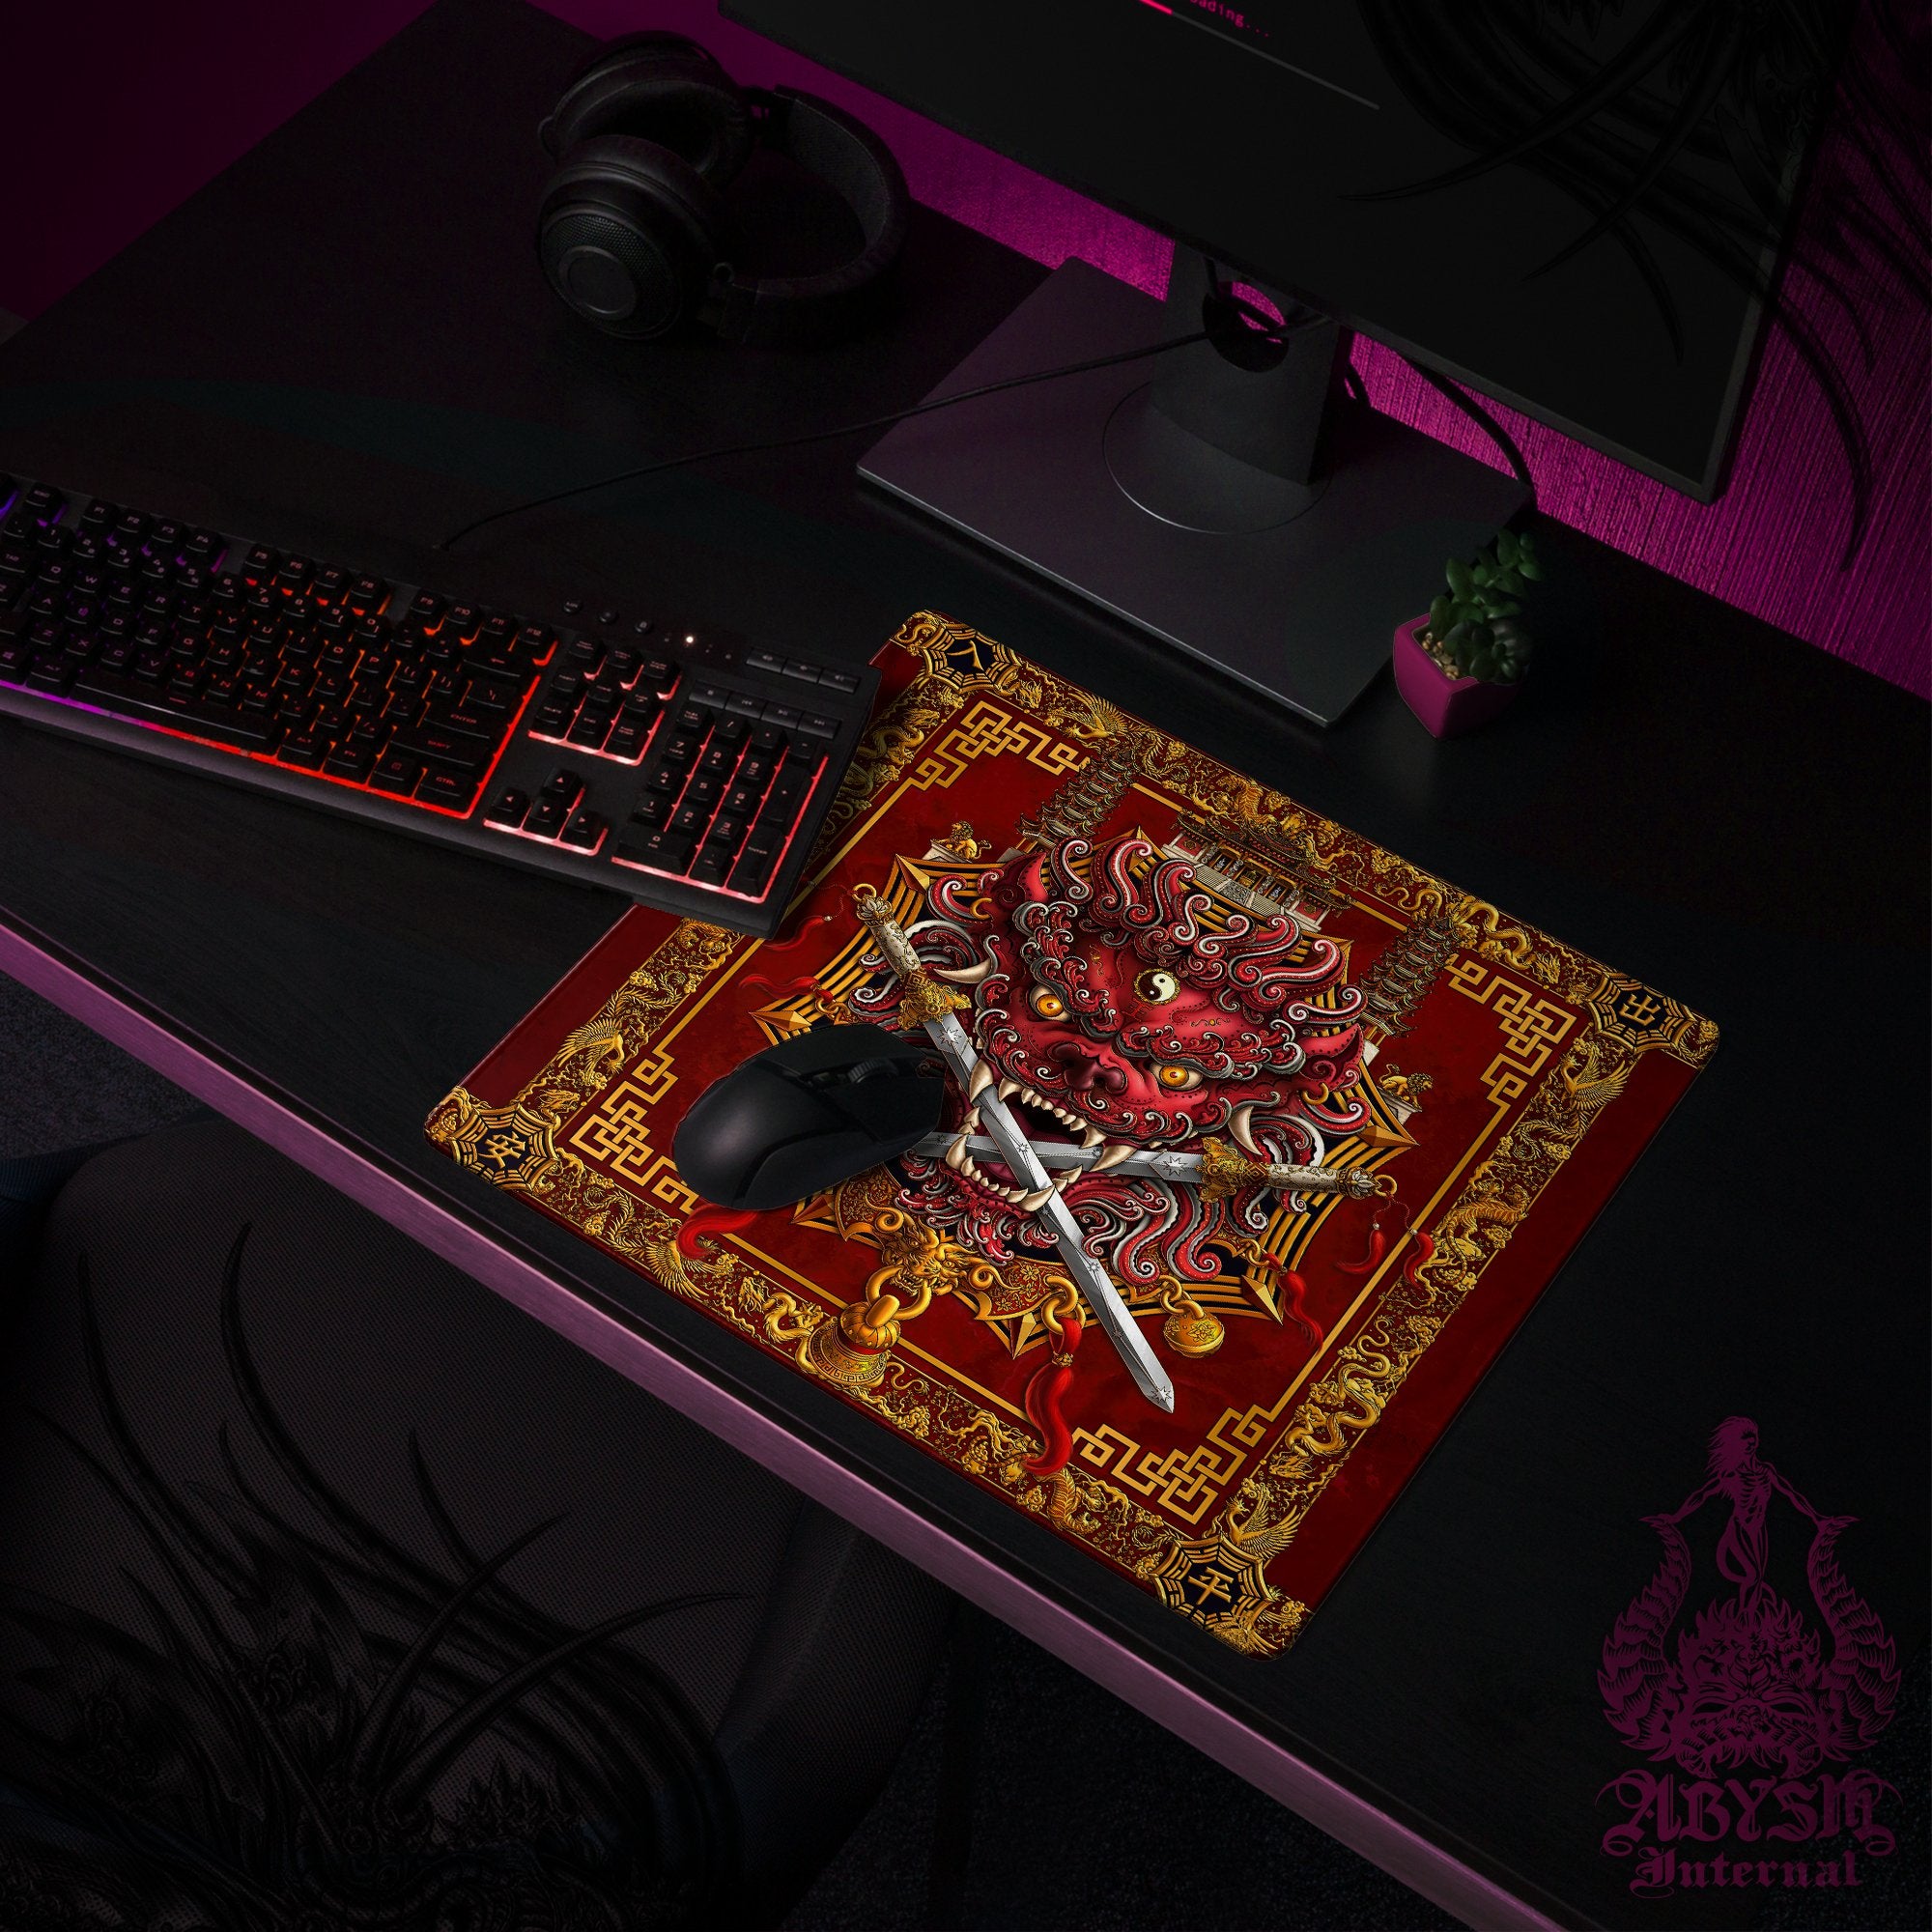 Taiwan Lion Gaming Desk Mat, Red Mouse Pad, Chinese Table Protector Cover, Asian Workpad, Fantasy Art Print - Abysm Internal